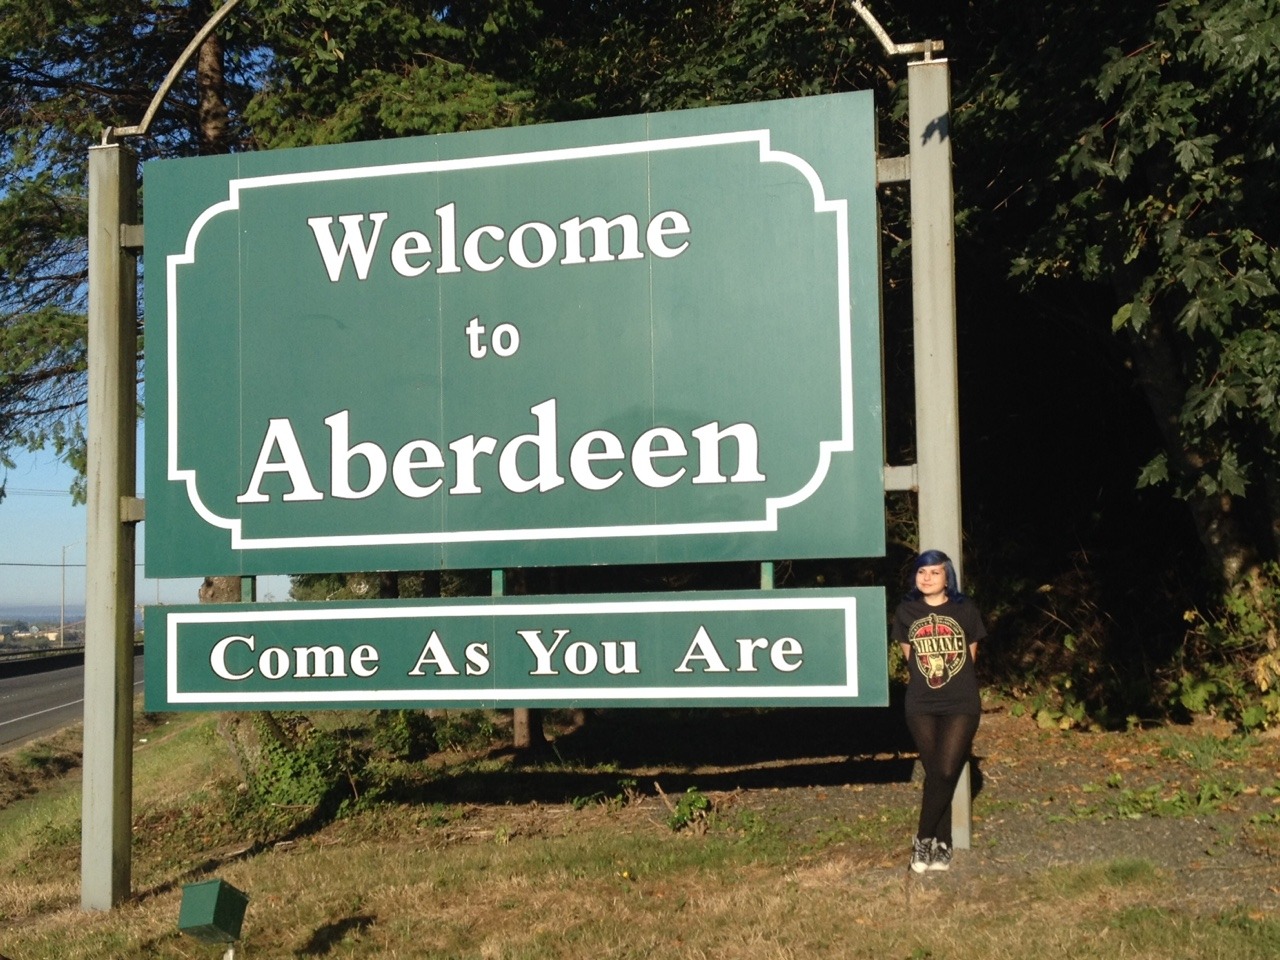 eileen-confusion:  Today I was in Aberdeen WA, where Kurt Cobain was born and lived.